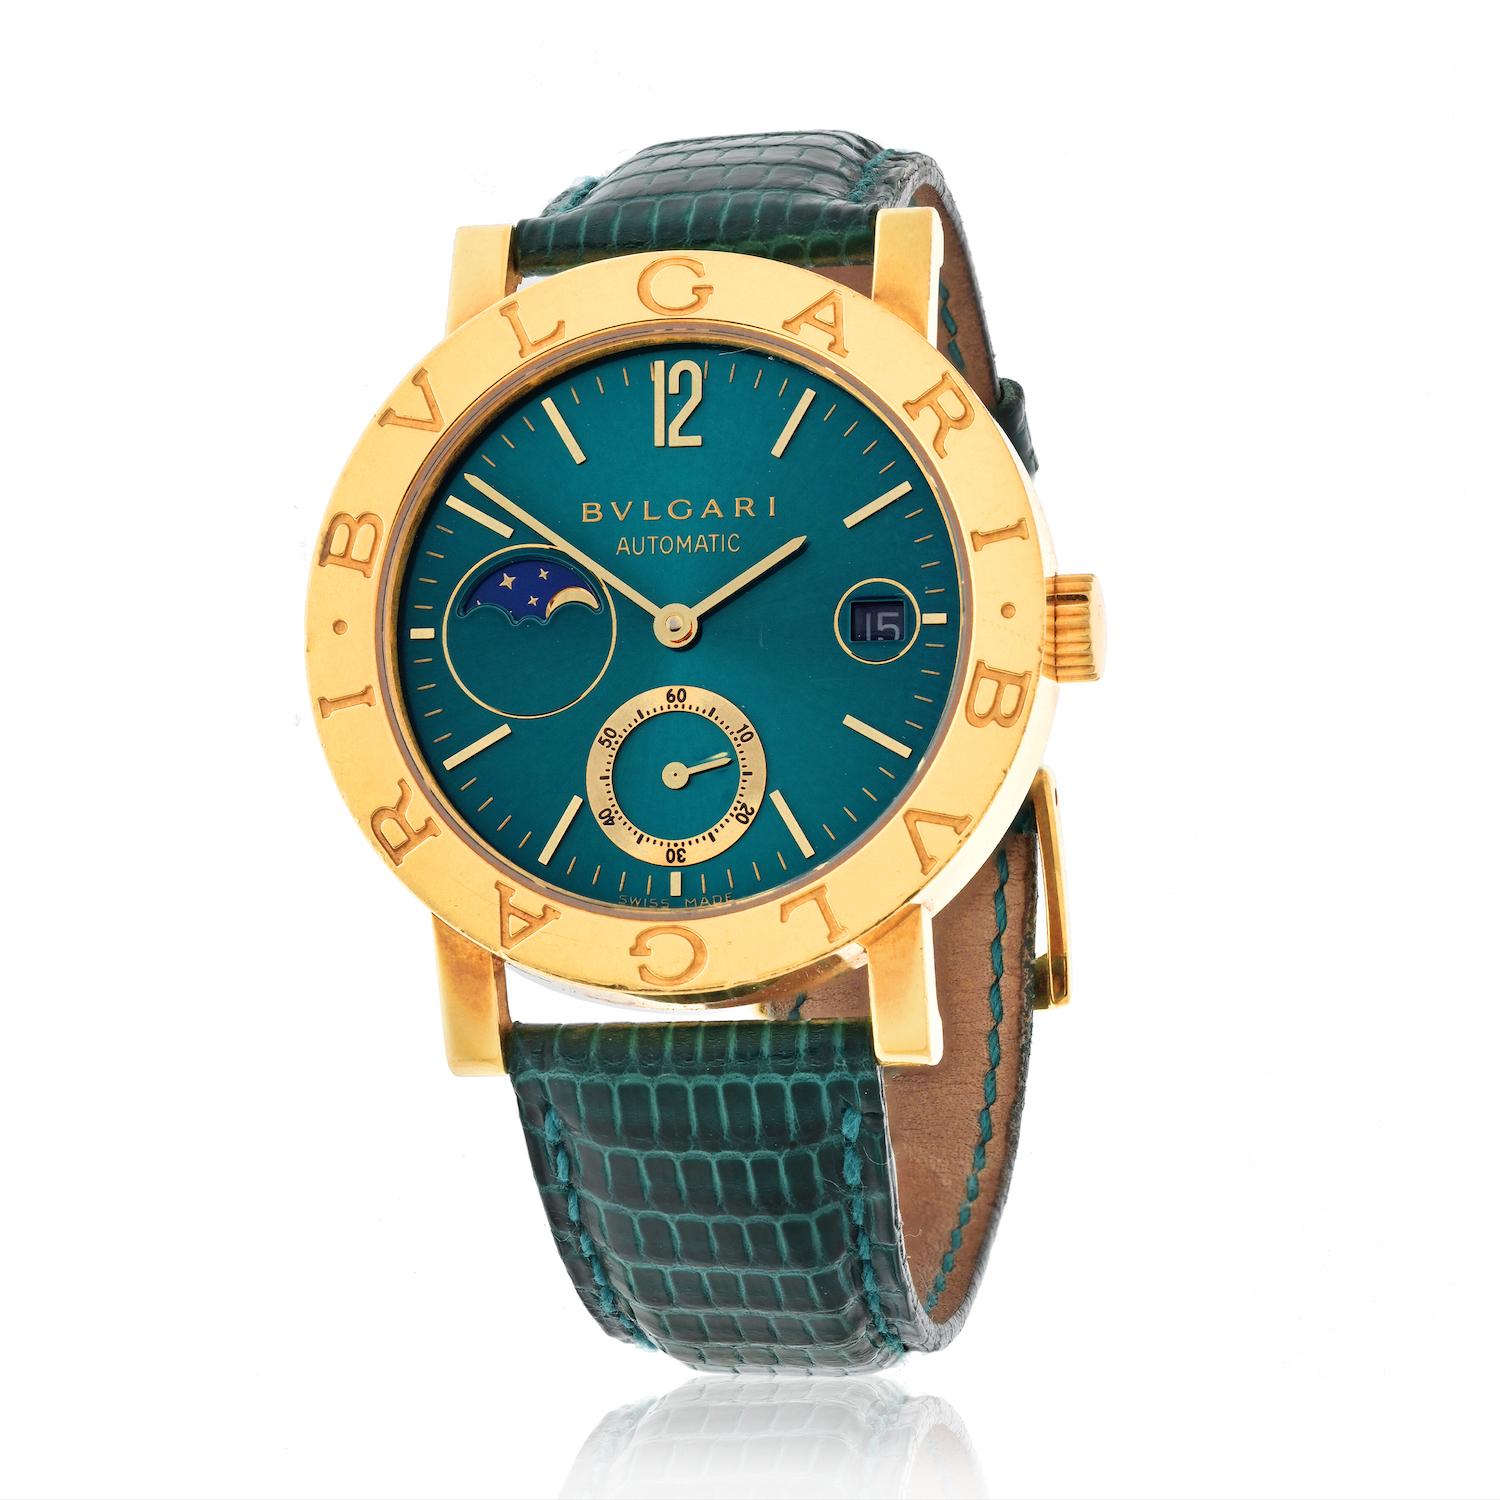 The Bulgari Bulgari Limited Edition 18k gold wristwatch with green dial is a true masterpiece of fine craftsmanship and luxury design. 

The automatic movement powers this timepiece with exceptional precision, providing accurate timekeeping. 

The